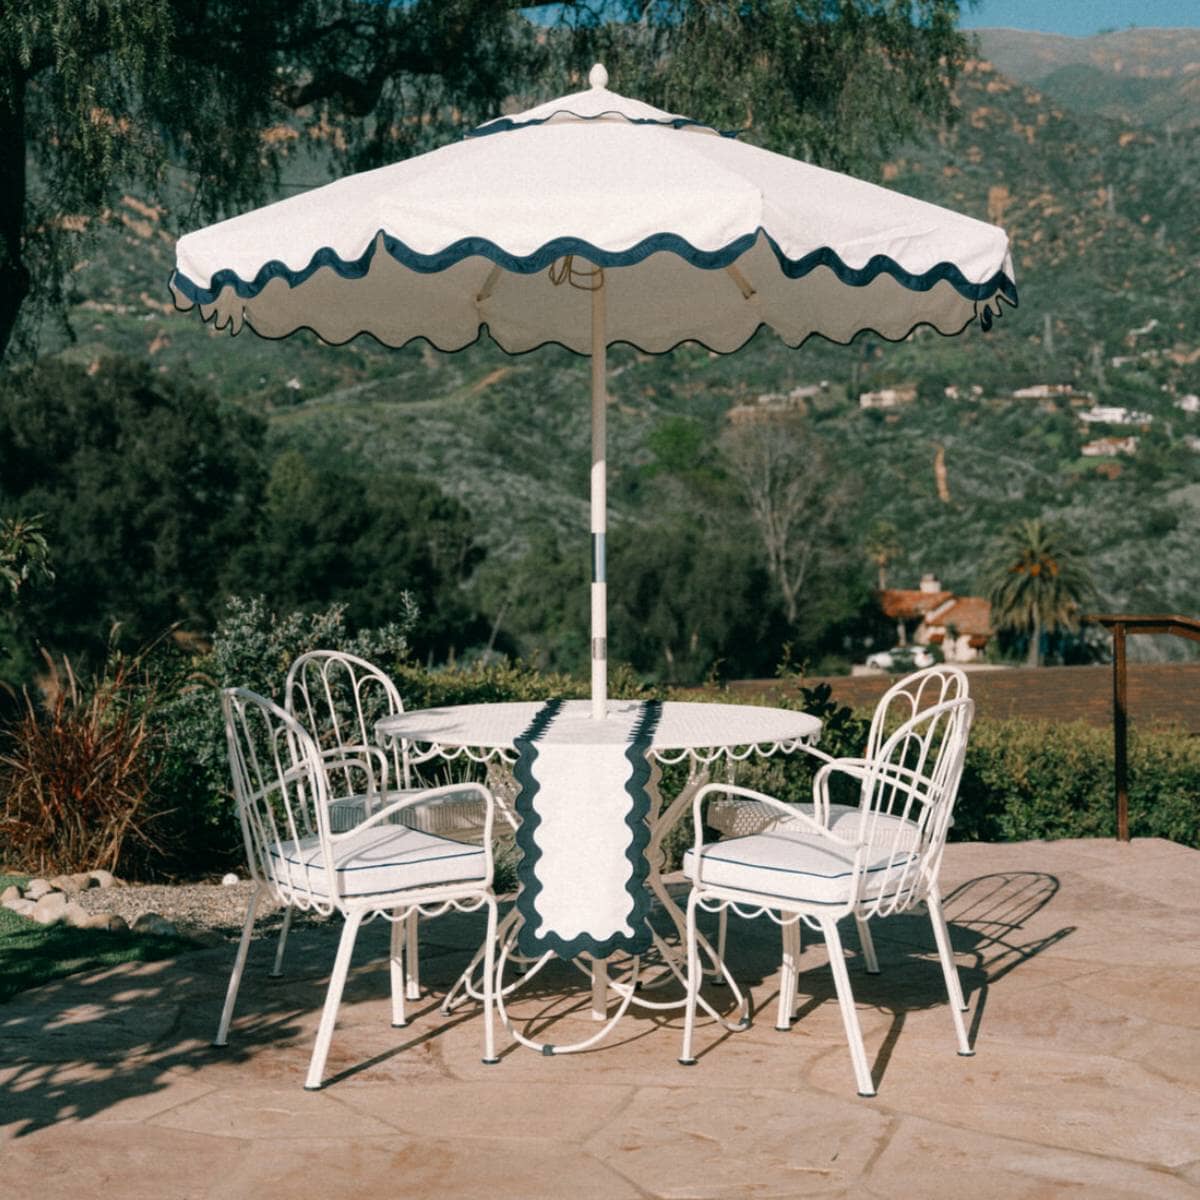 The Al Fresco Dining Chair - 4 Pack - Antique White Al Fresco Dining Chair 4 Pack Business & Pleasure Co Aus 